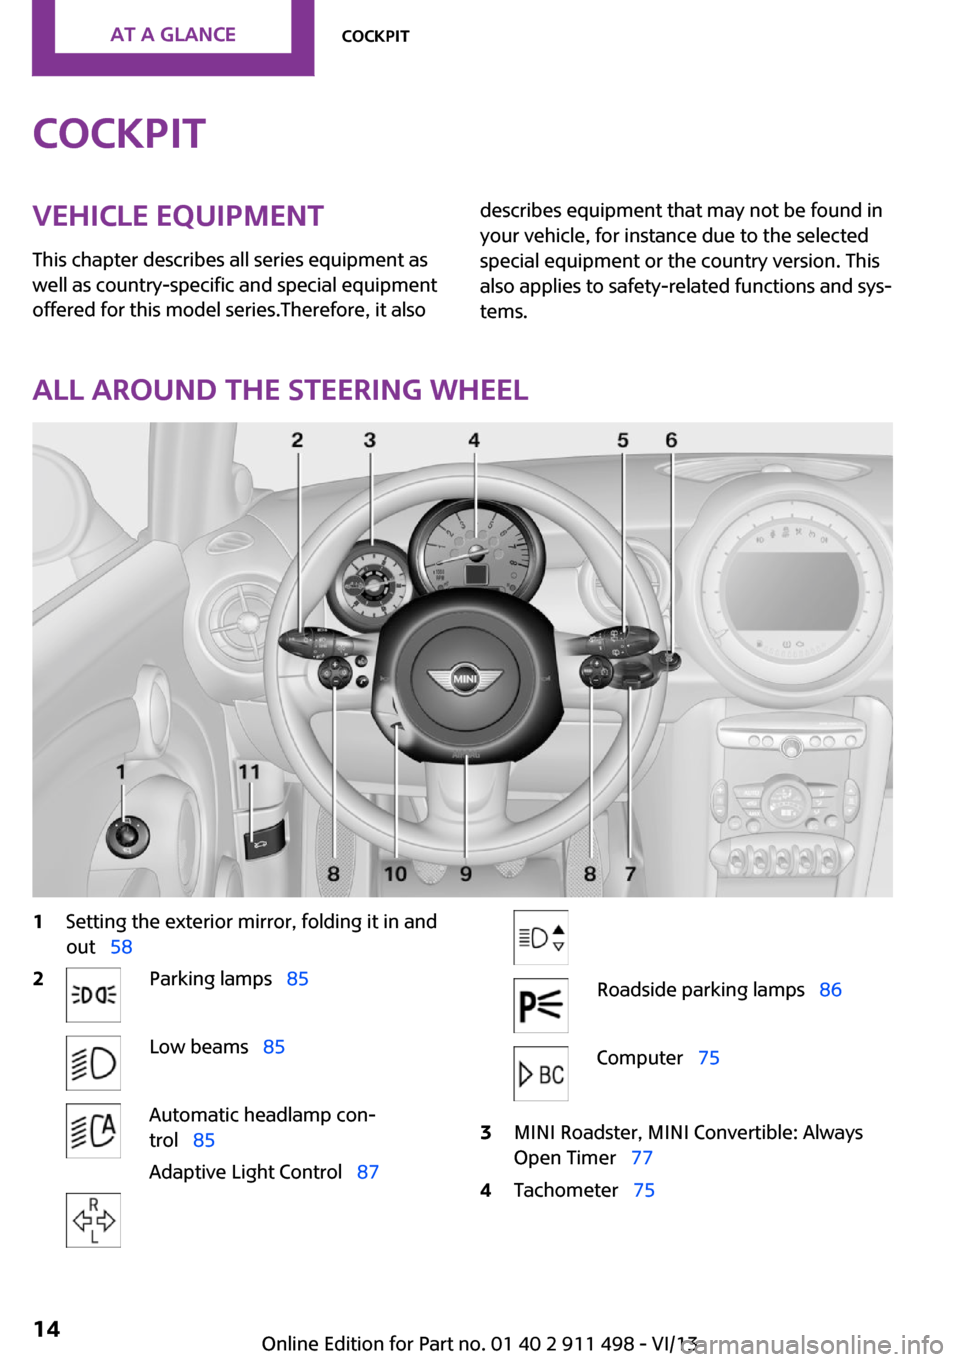 MINI Roadster 2014   (Mini Connected) User Guide CockpitVehicle equipment
This chapter describes all series equipment as
well as country-specific and special equipment
offered for this model series.Therefore, it alsodescribes equipment that may not 